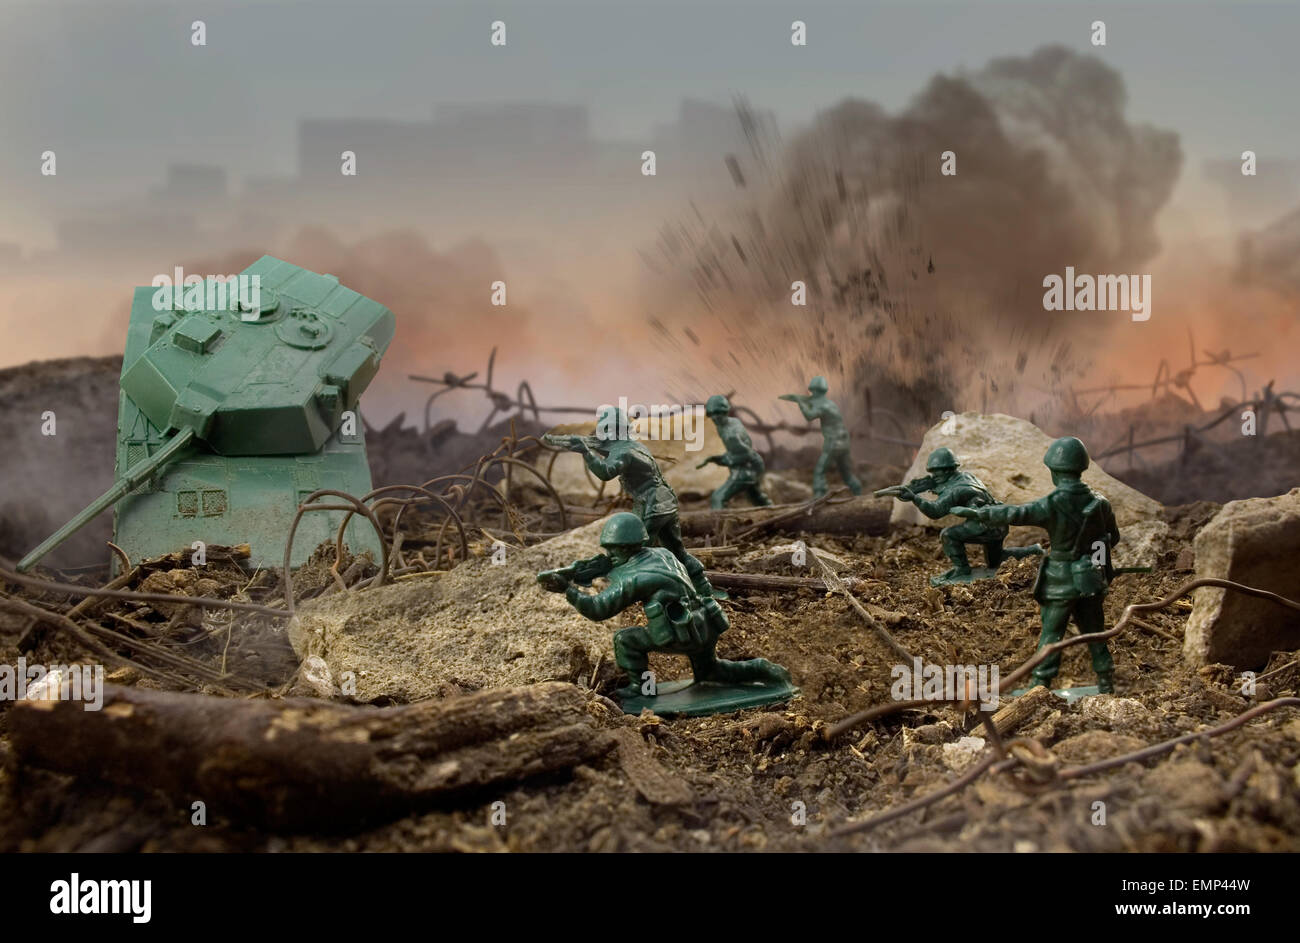 Toy war field. Plastic toy attack war scene with soldiers, weapons and explosions. Stock Photo